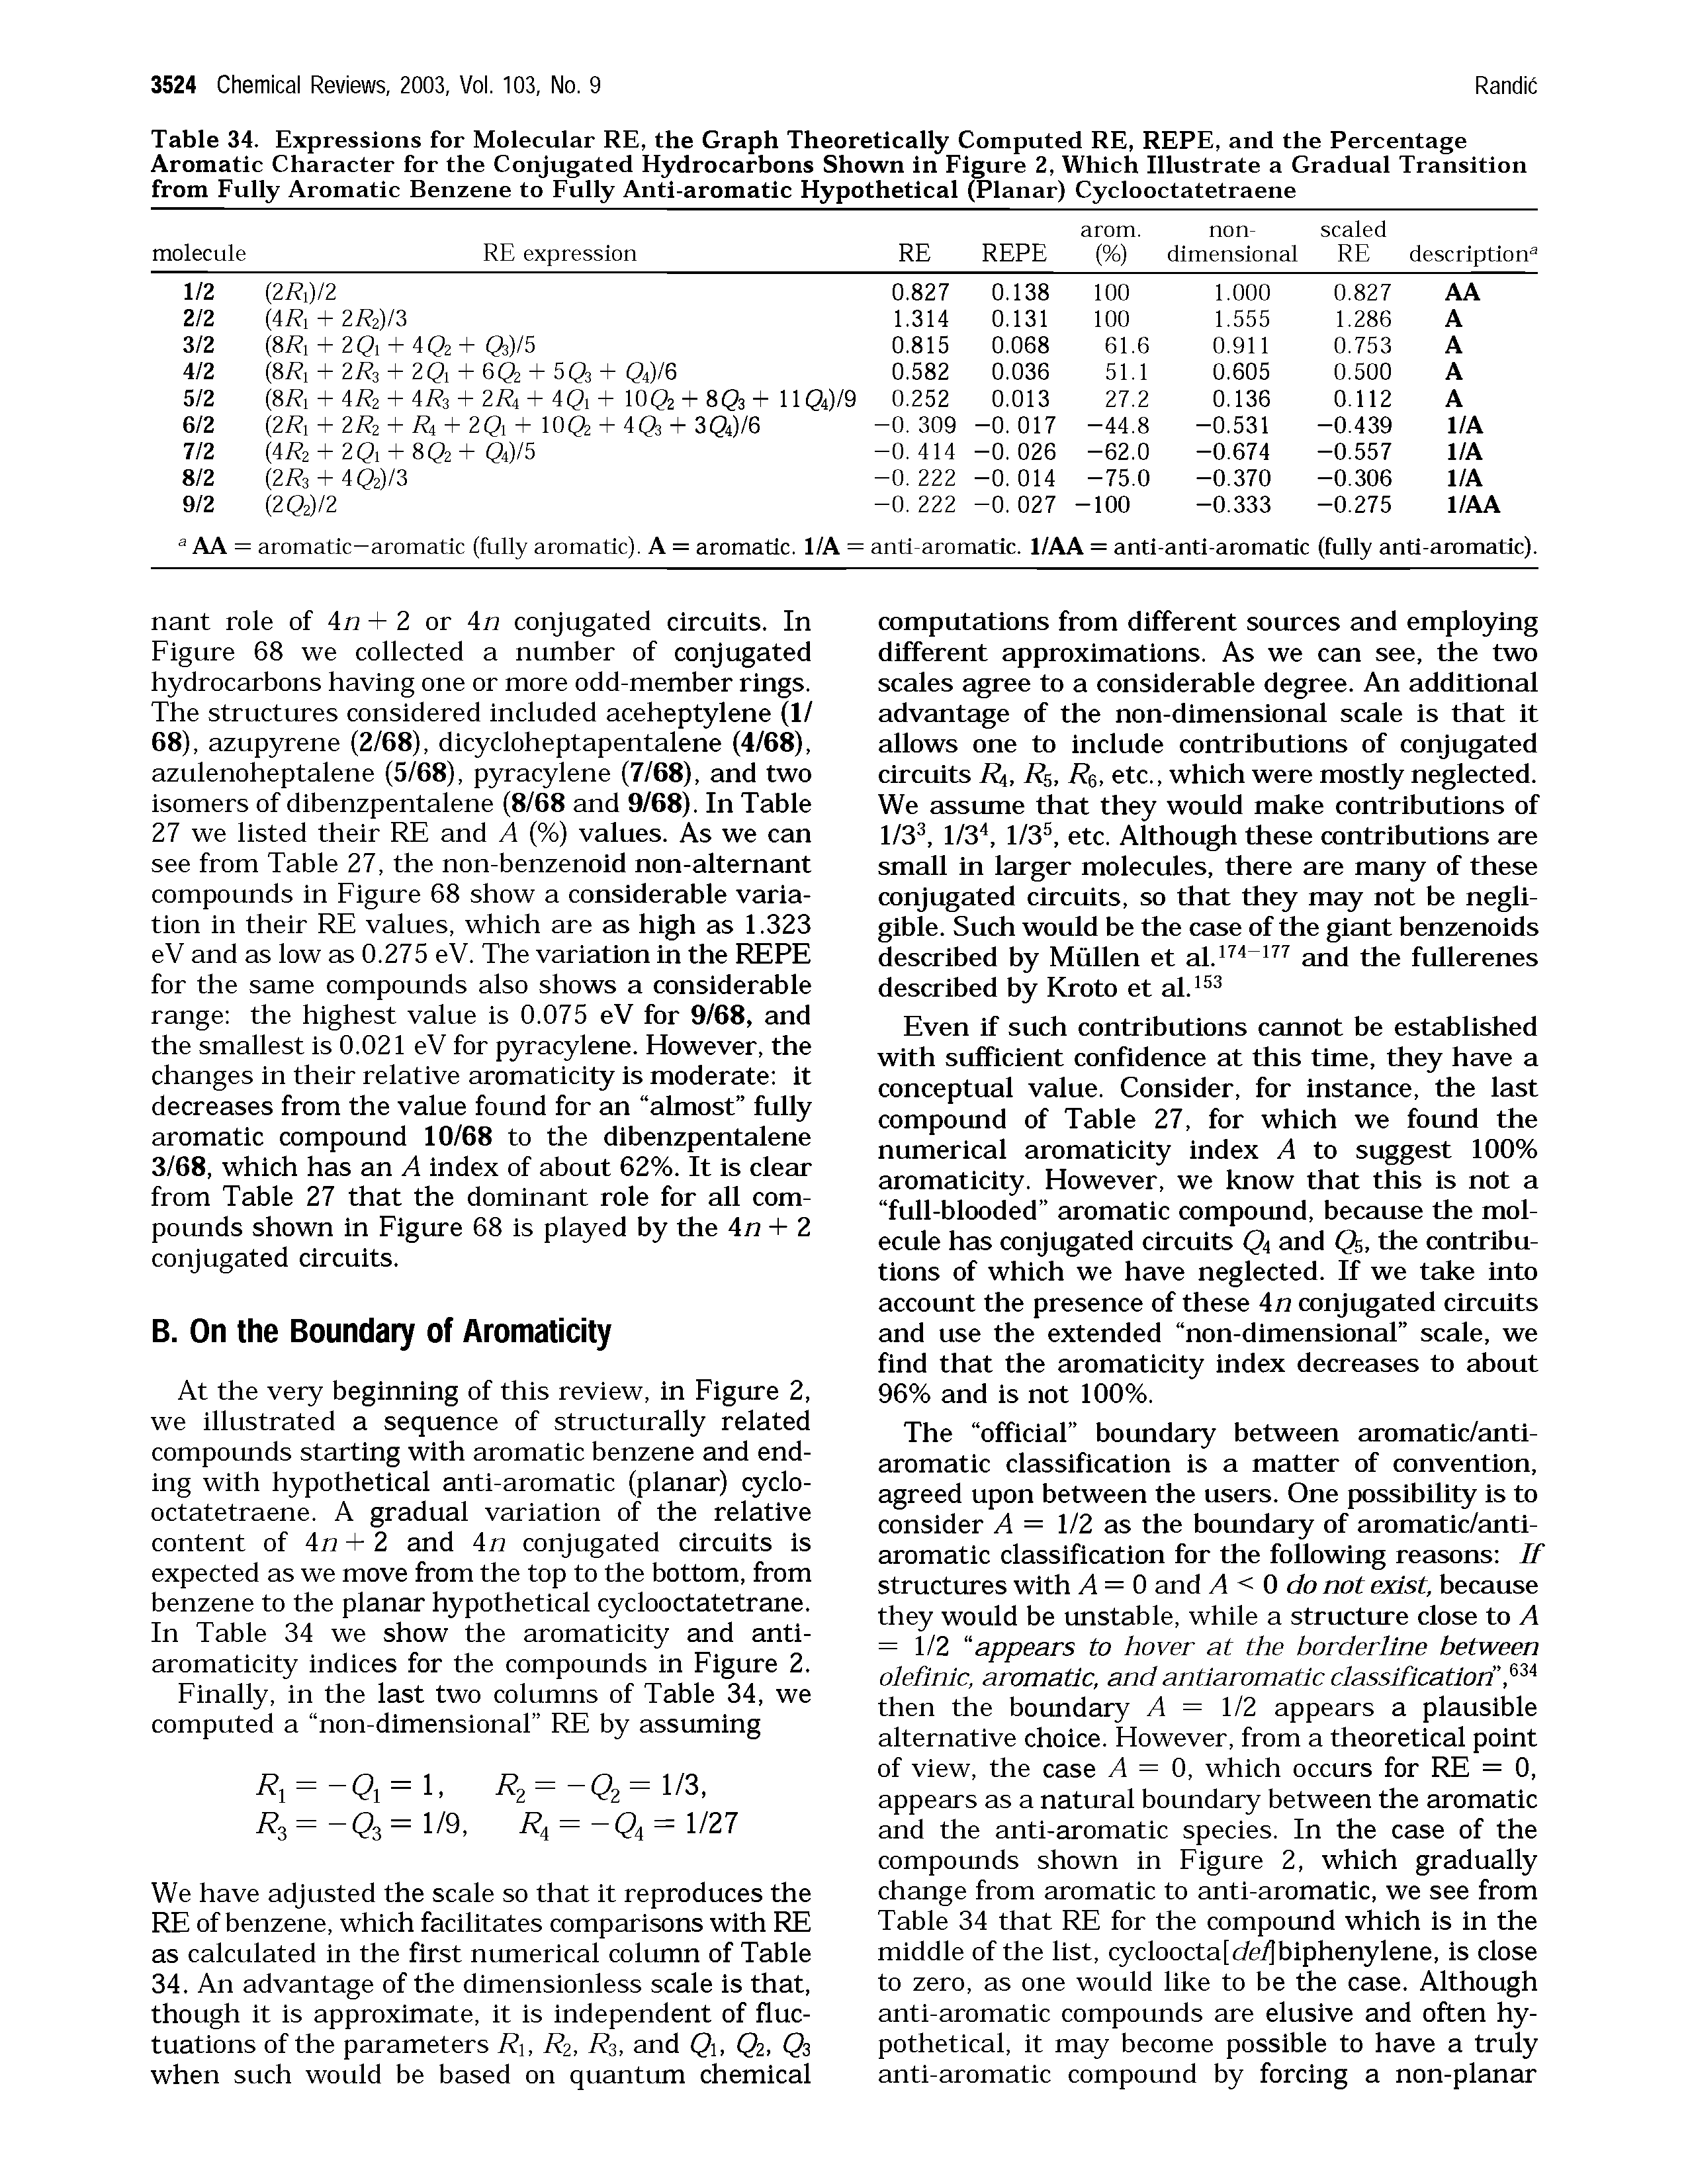 Table 34. Expressions for Molecular RE, the Graph Theoretically Computed RE, REPE, and the Percentage Aromatic Character for the Conjugated Hydrocarbons Shown in Figure 2, Which Illustrate a Gradual Transition from Fully Aromatic Benzene to Fully Anti-aromatic Hypothetical (Planar) Cyclooctatetraene...